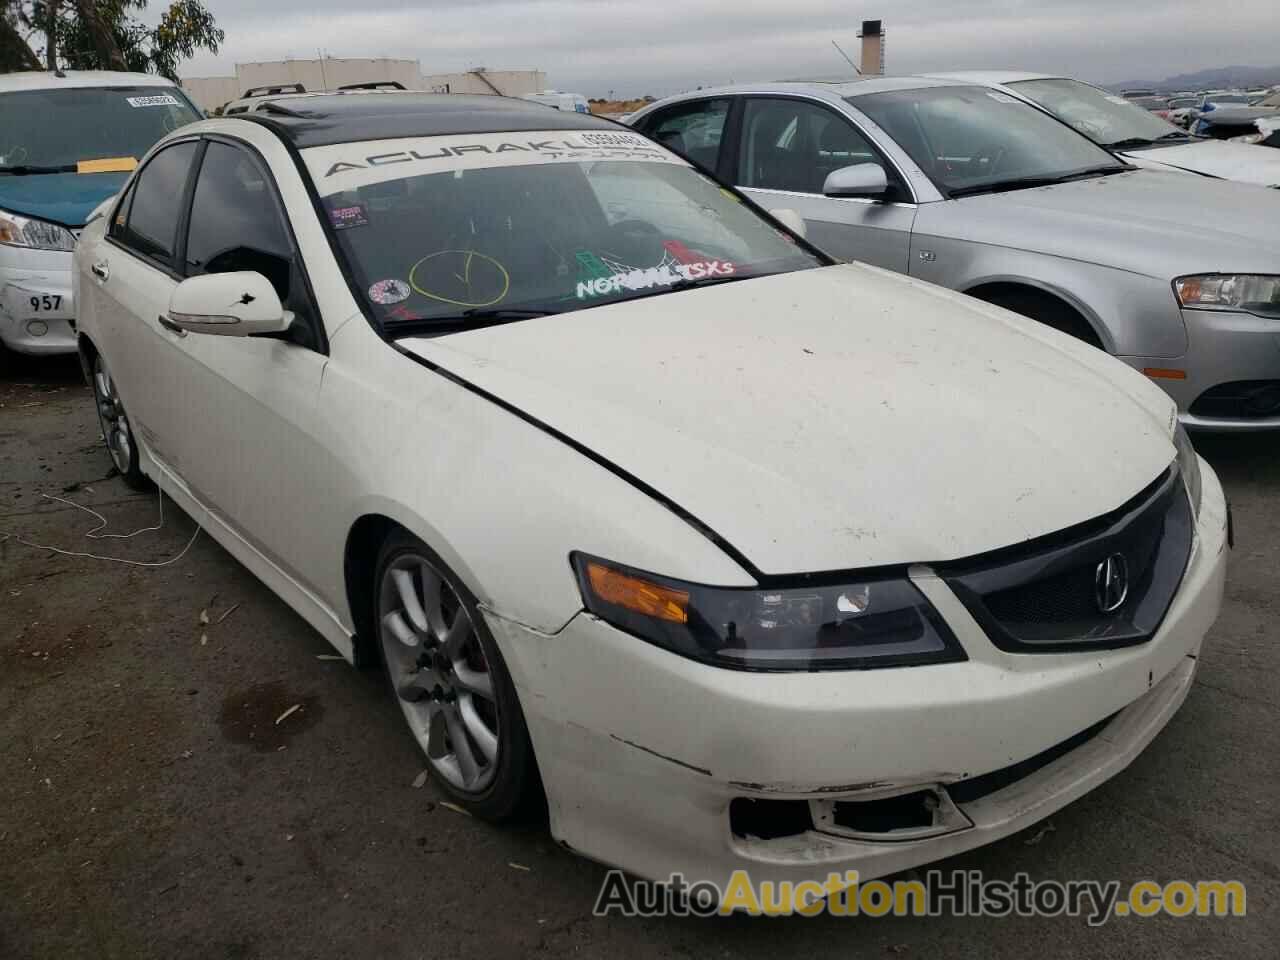 2008 ACURA TSX, JH4CL96818C012947